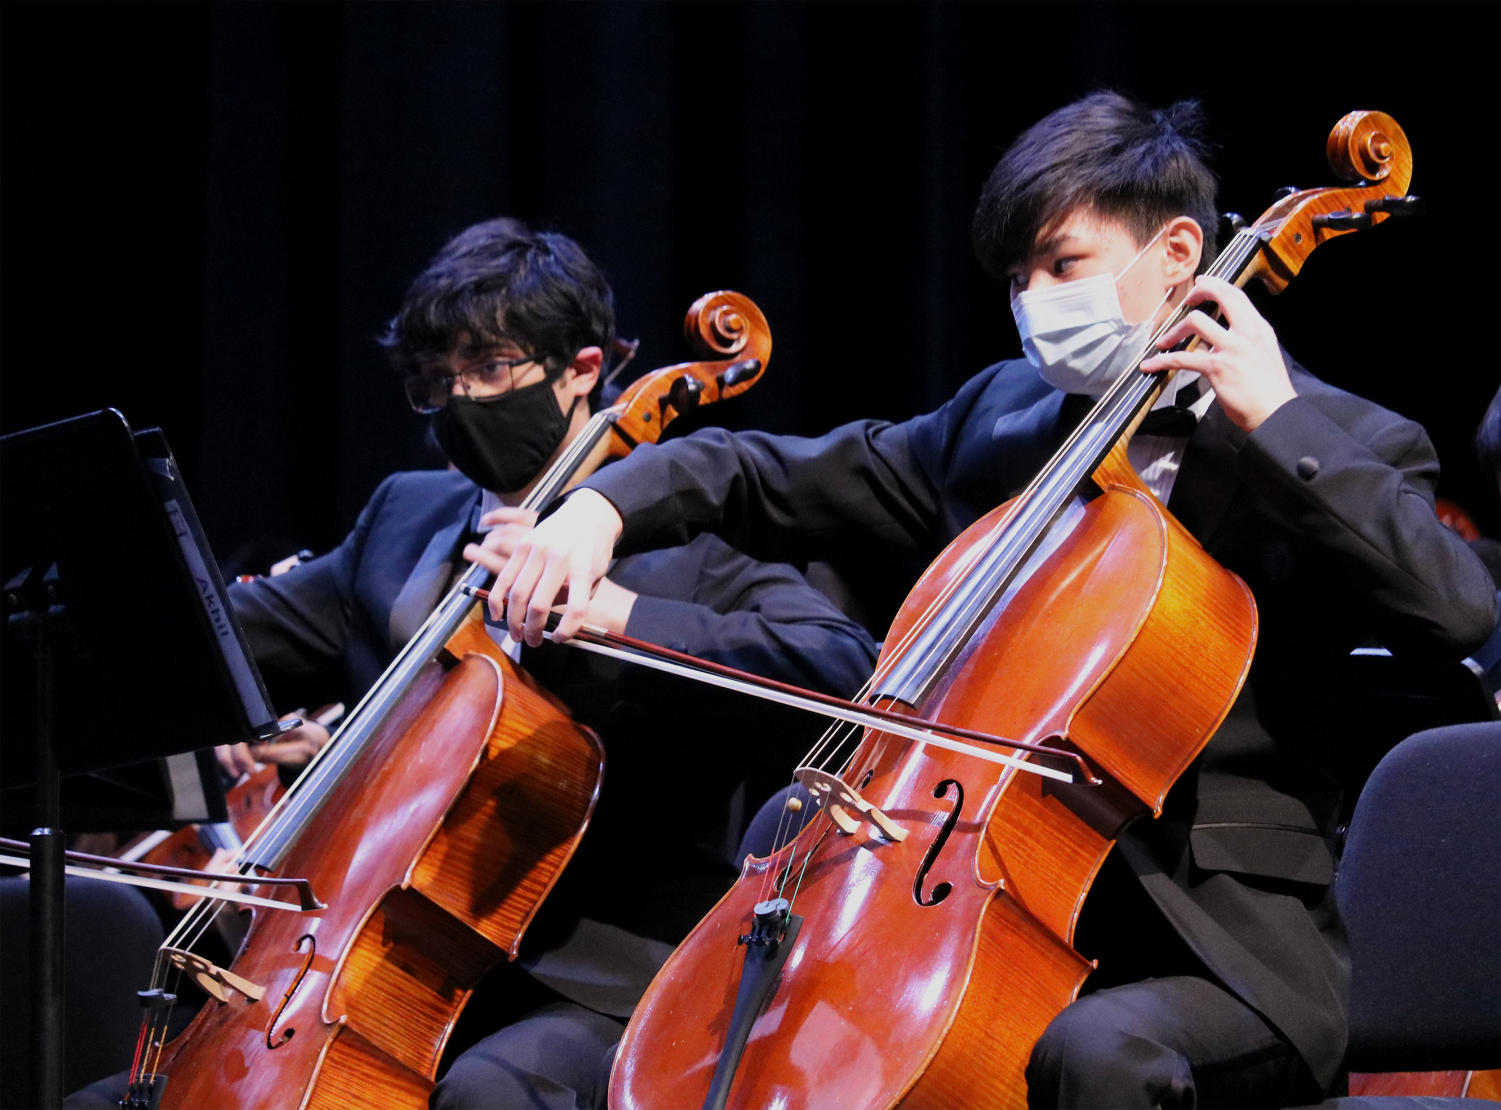 Students+Shine+at+Region+26+Orchestra+Concert%2C+an+Evening+Illuminating+Musical+Achievement